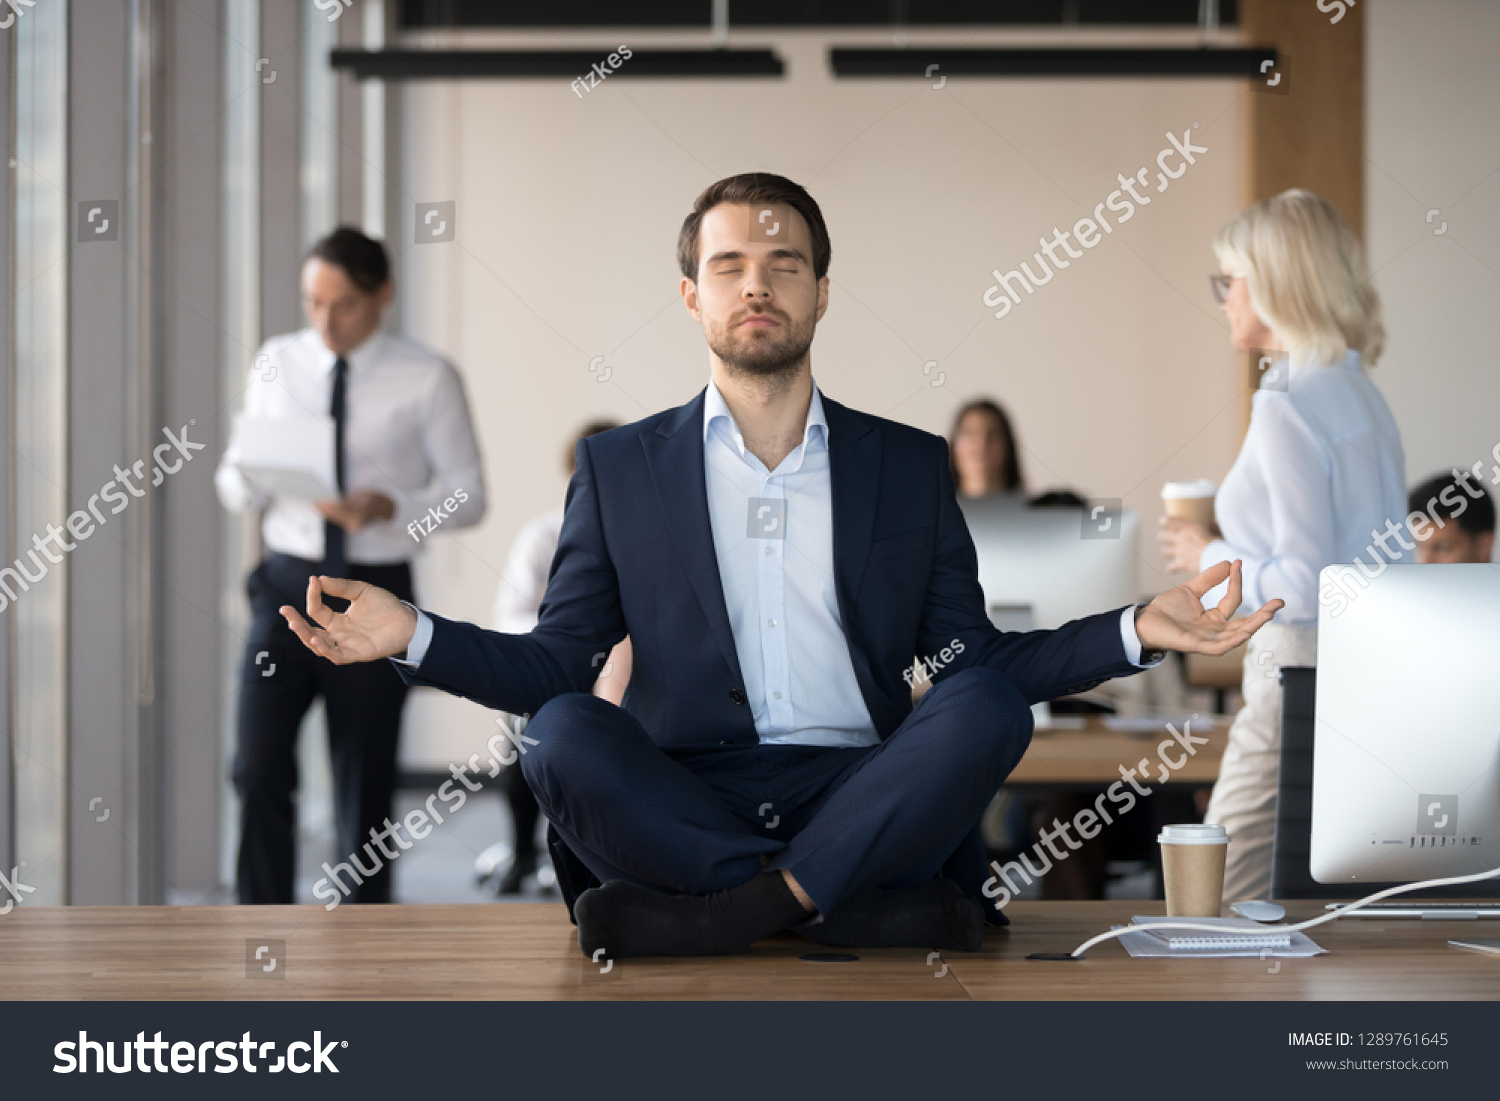 Mindful calm businessman in suit meditating at office sitting in lotus position on work desk, successful ceo executive doing yoga exercise at workplace, peace of mind, no stress free relief concept #1289761645